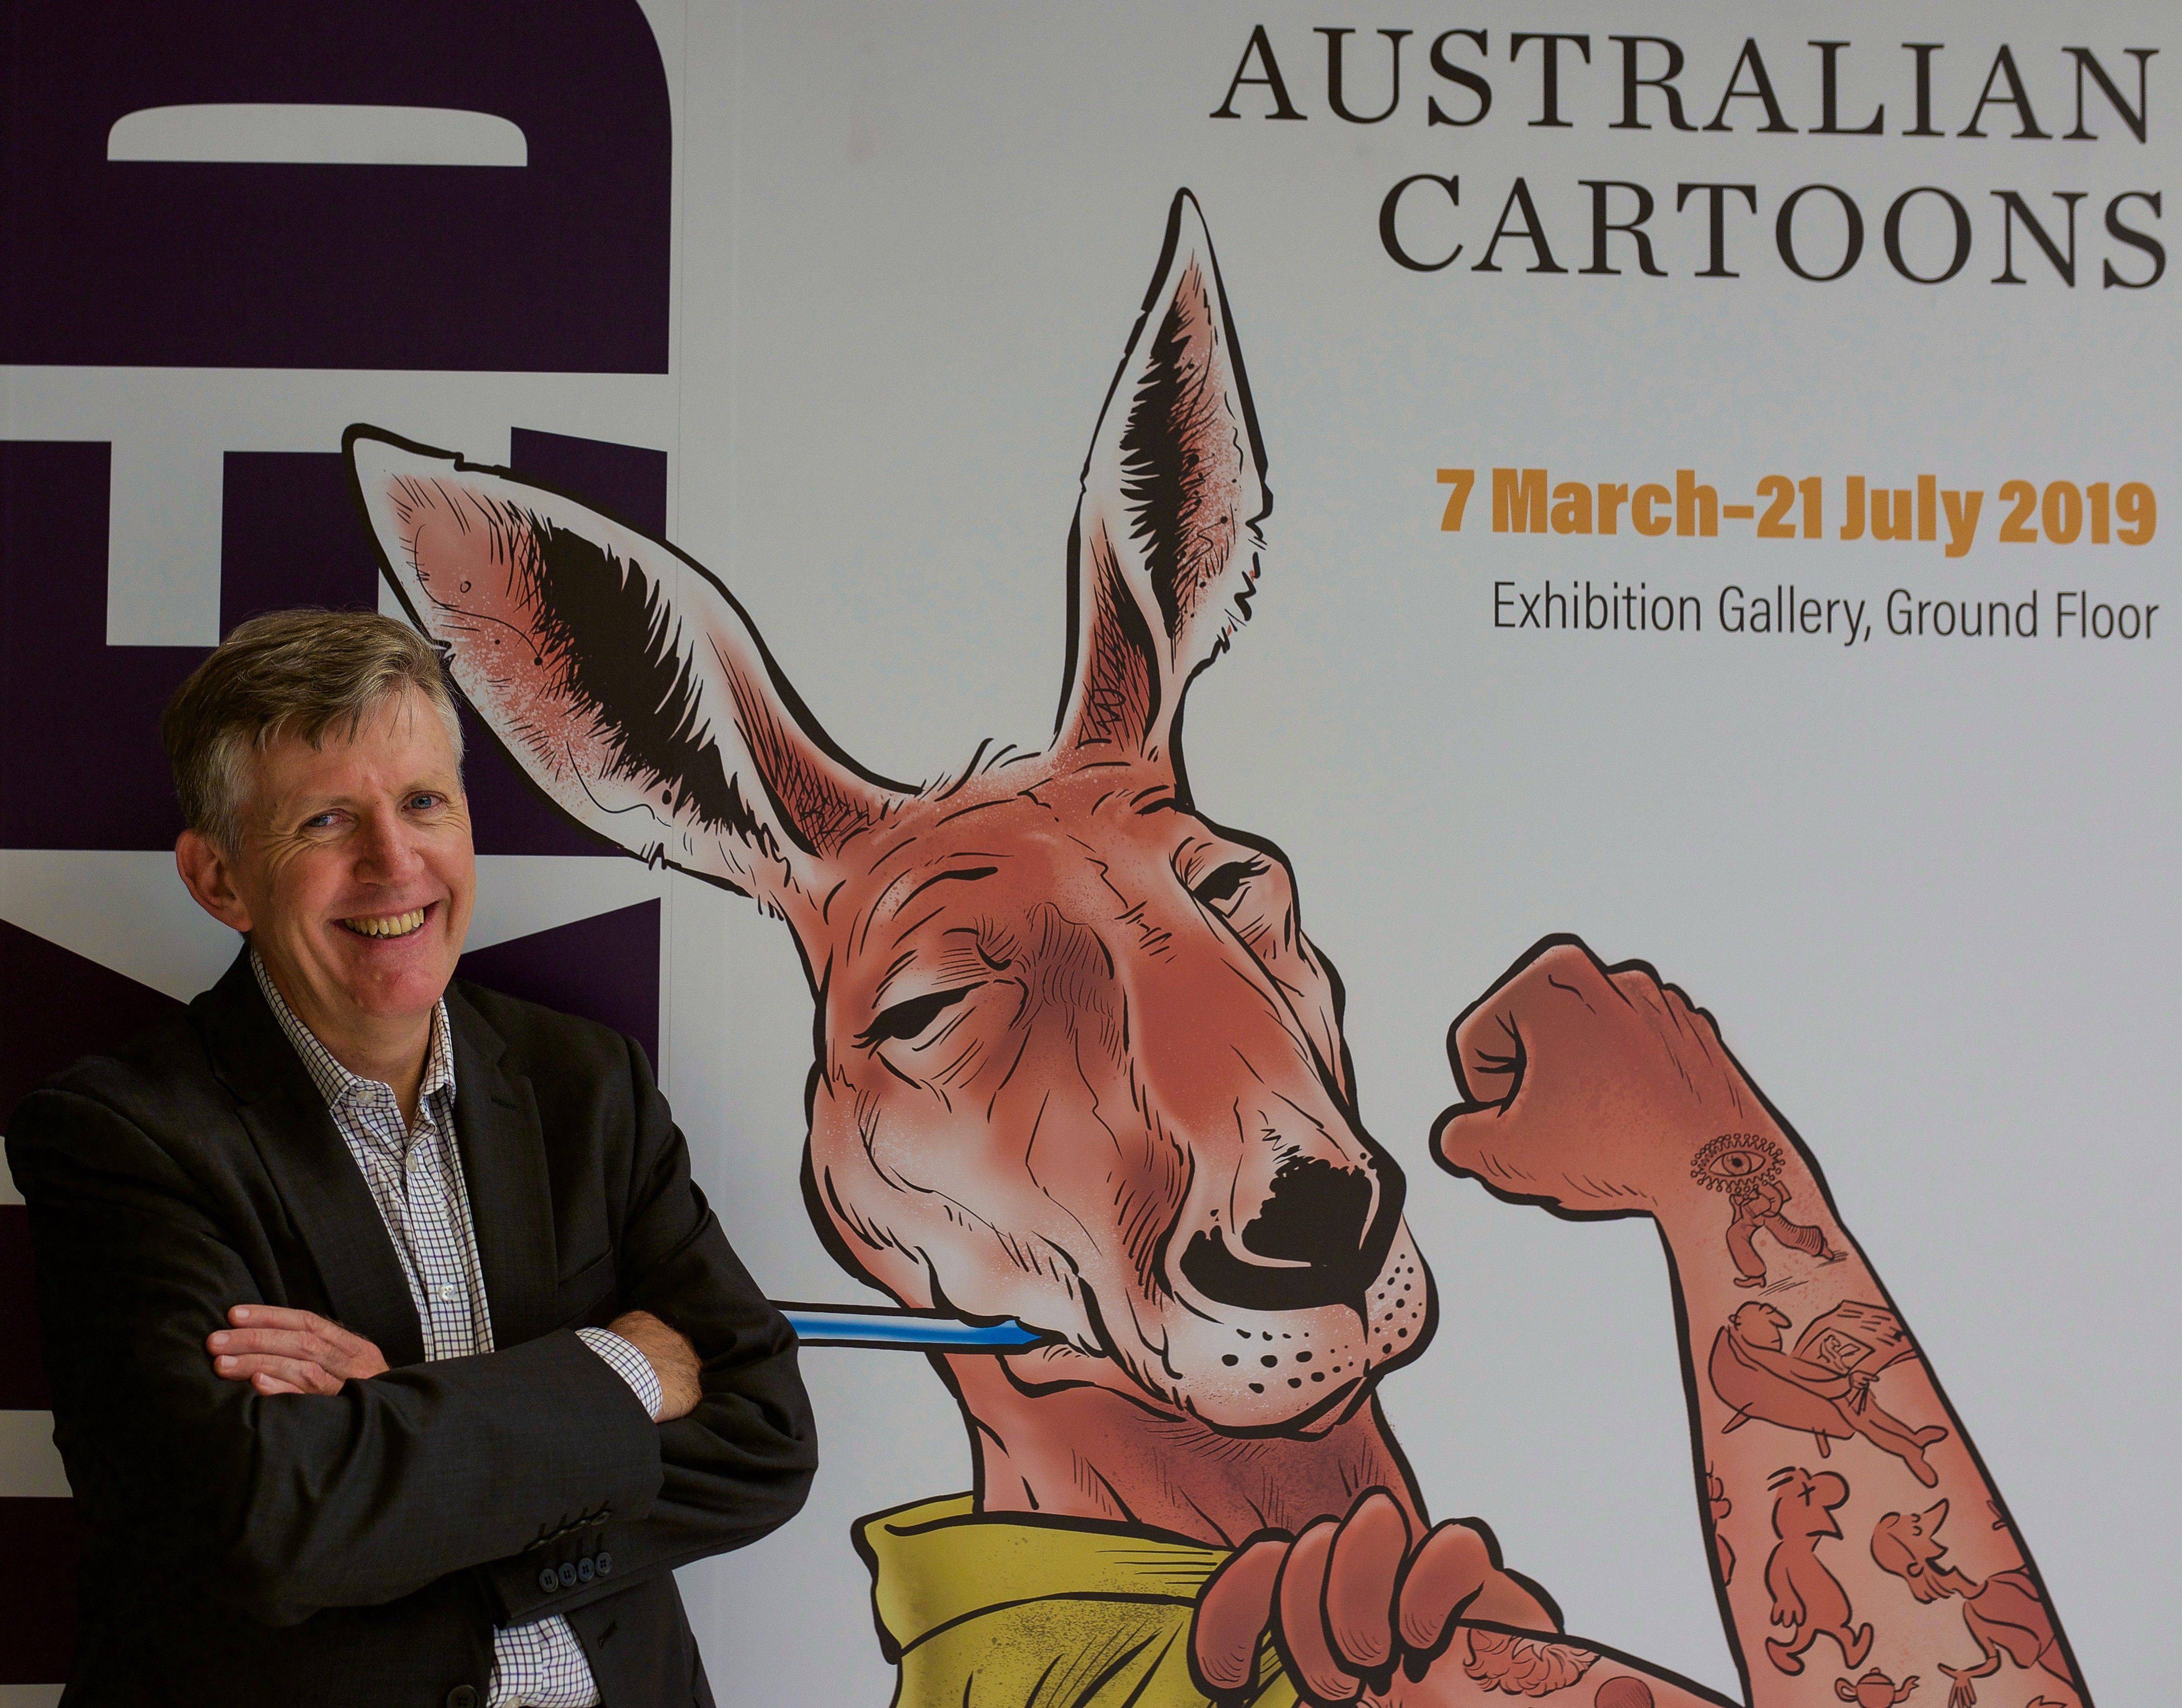 Muscling up to Australian cartoons? Get Inked